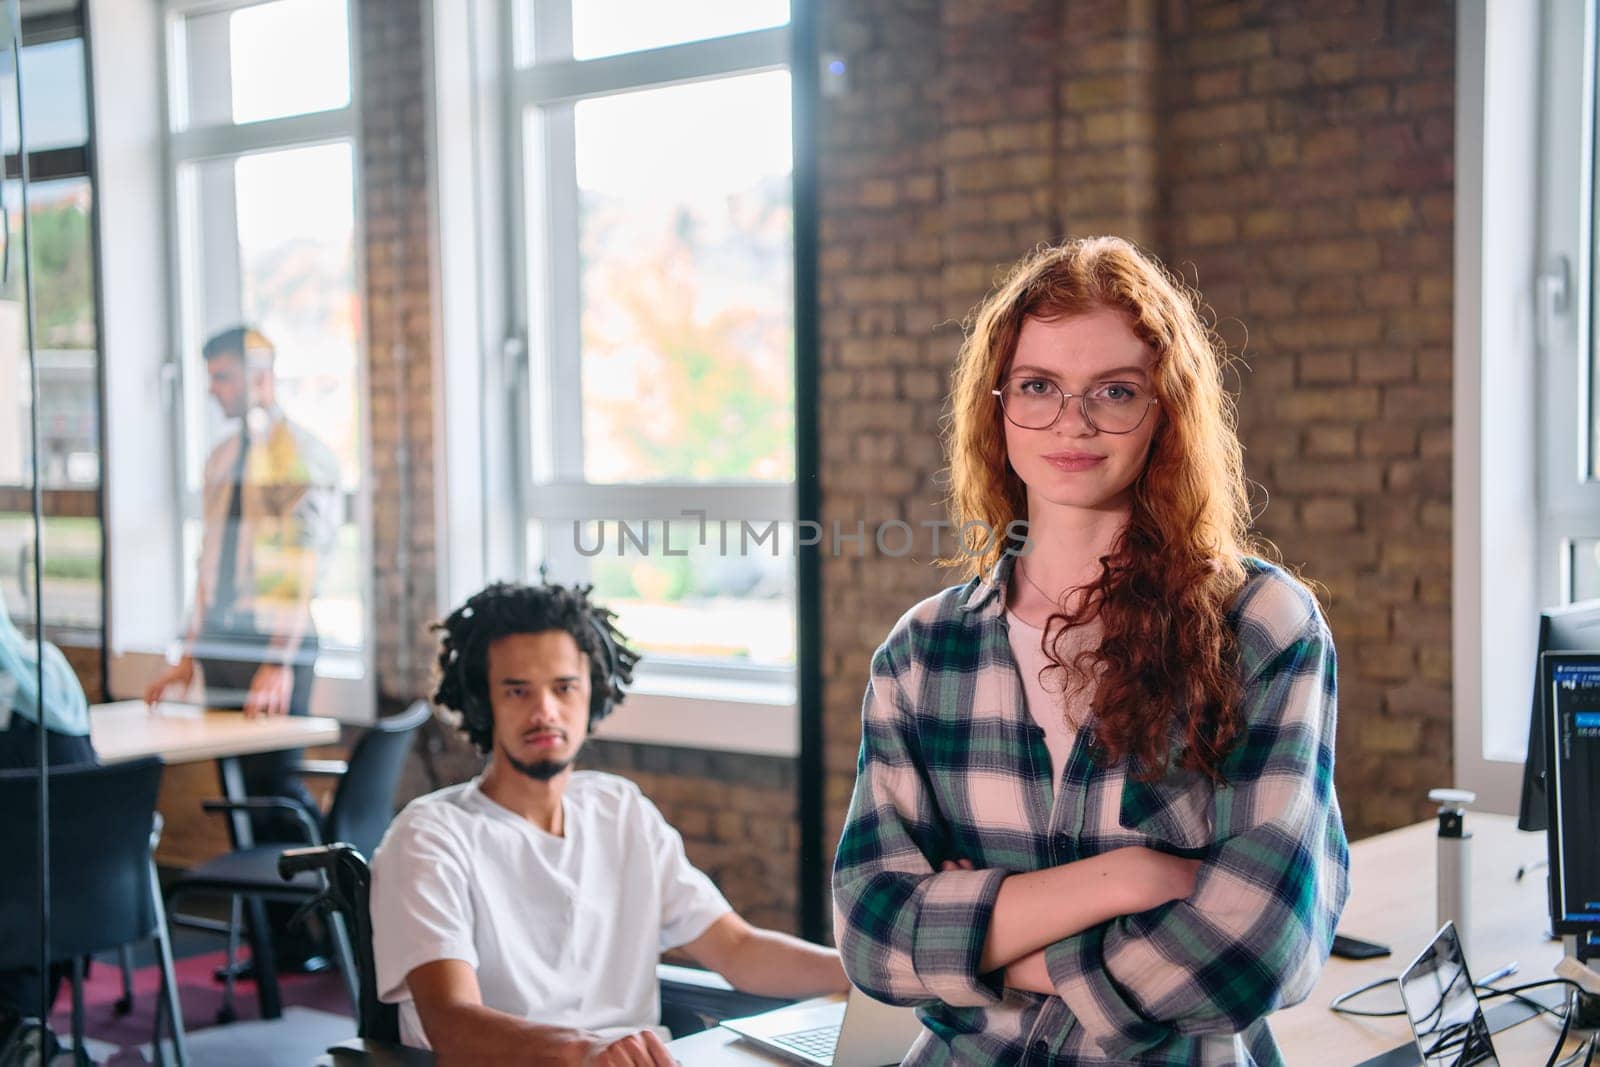 A portrait of a young businesswoman with modern orange hair captures her poised presence in a hallway of a contemporary startup coworking center, embodying individuality and professional confidence